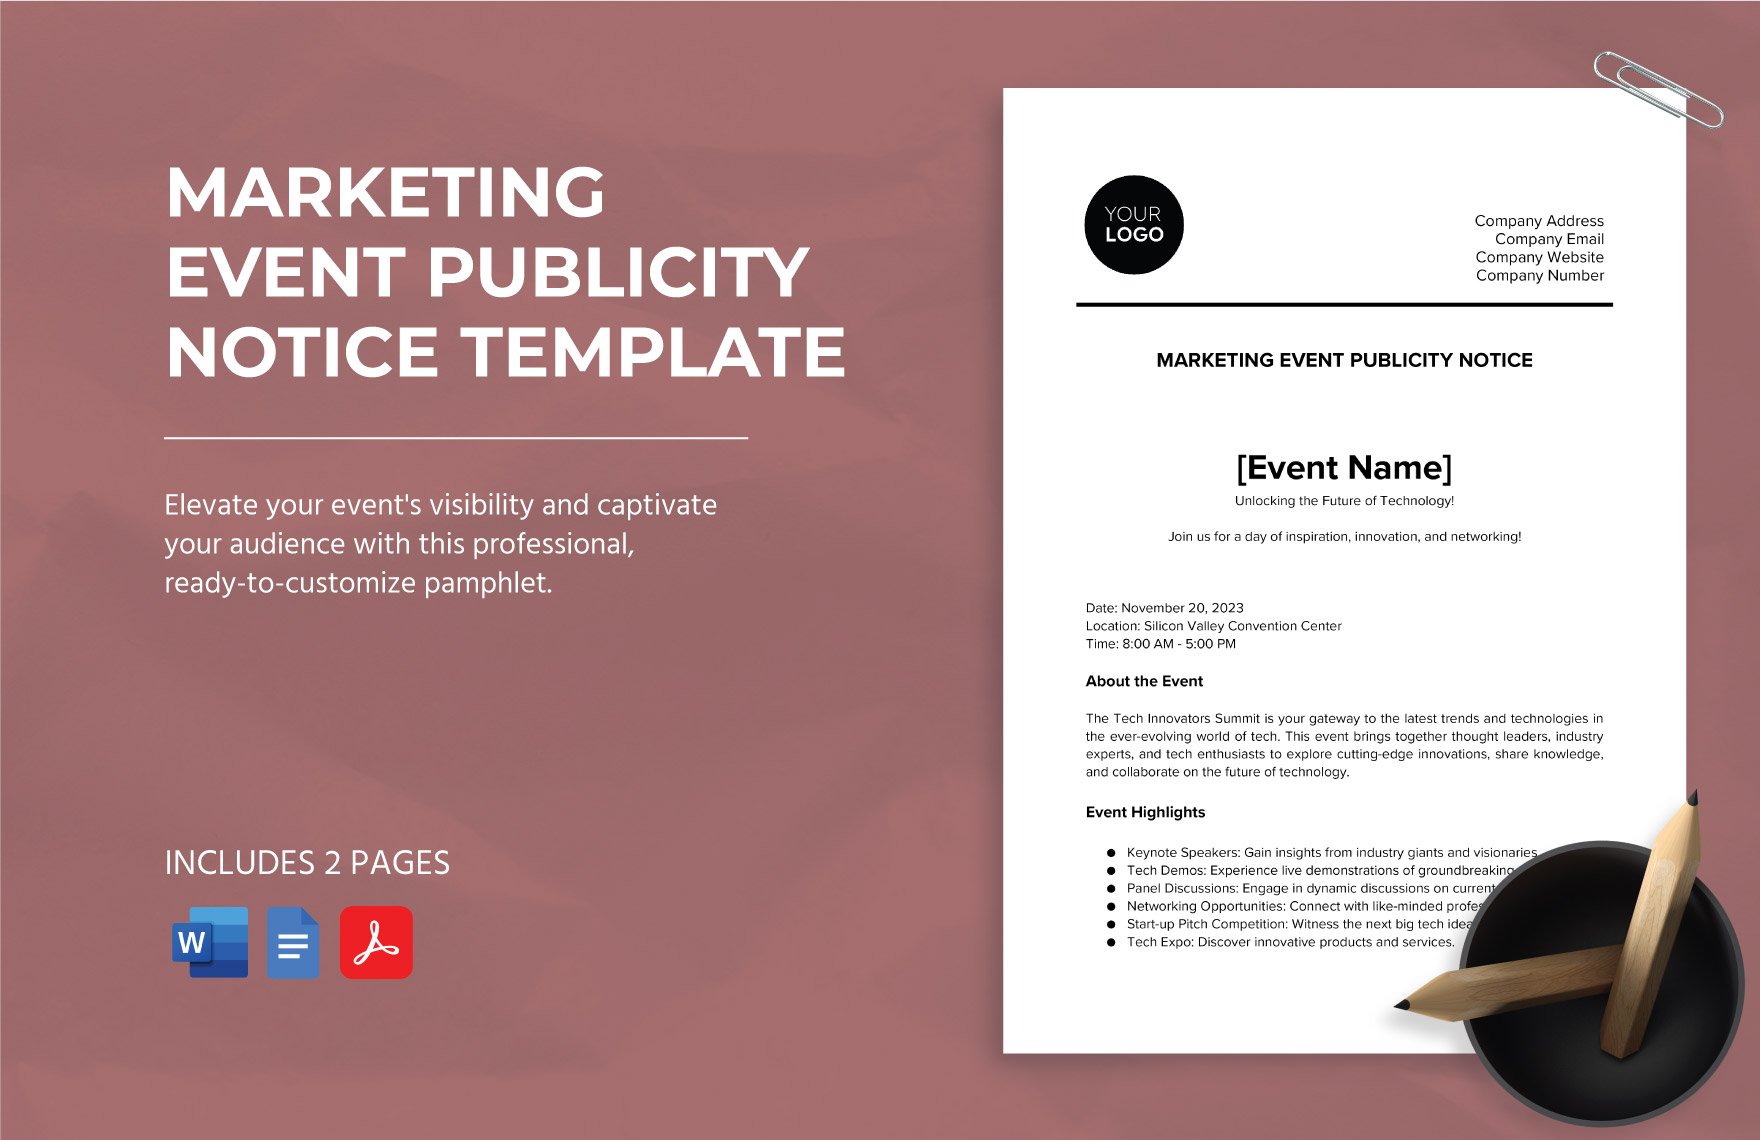 Marketing Event Publicity Notice Template in Word, Google Docs, PDF